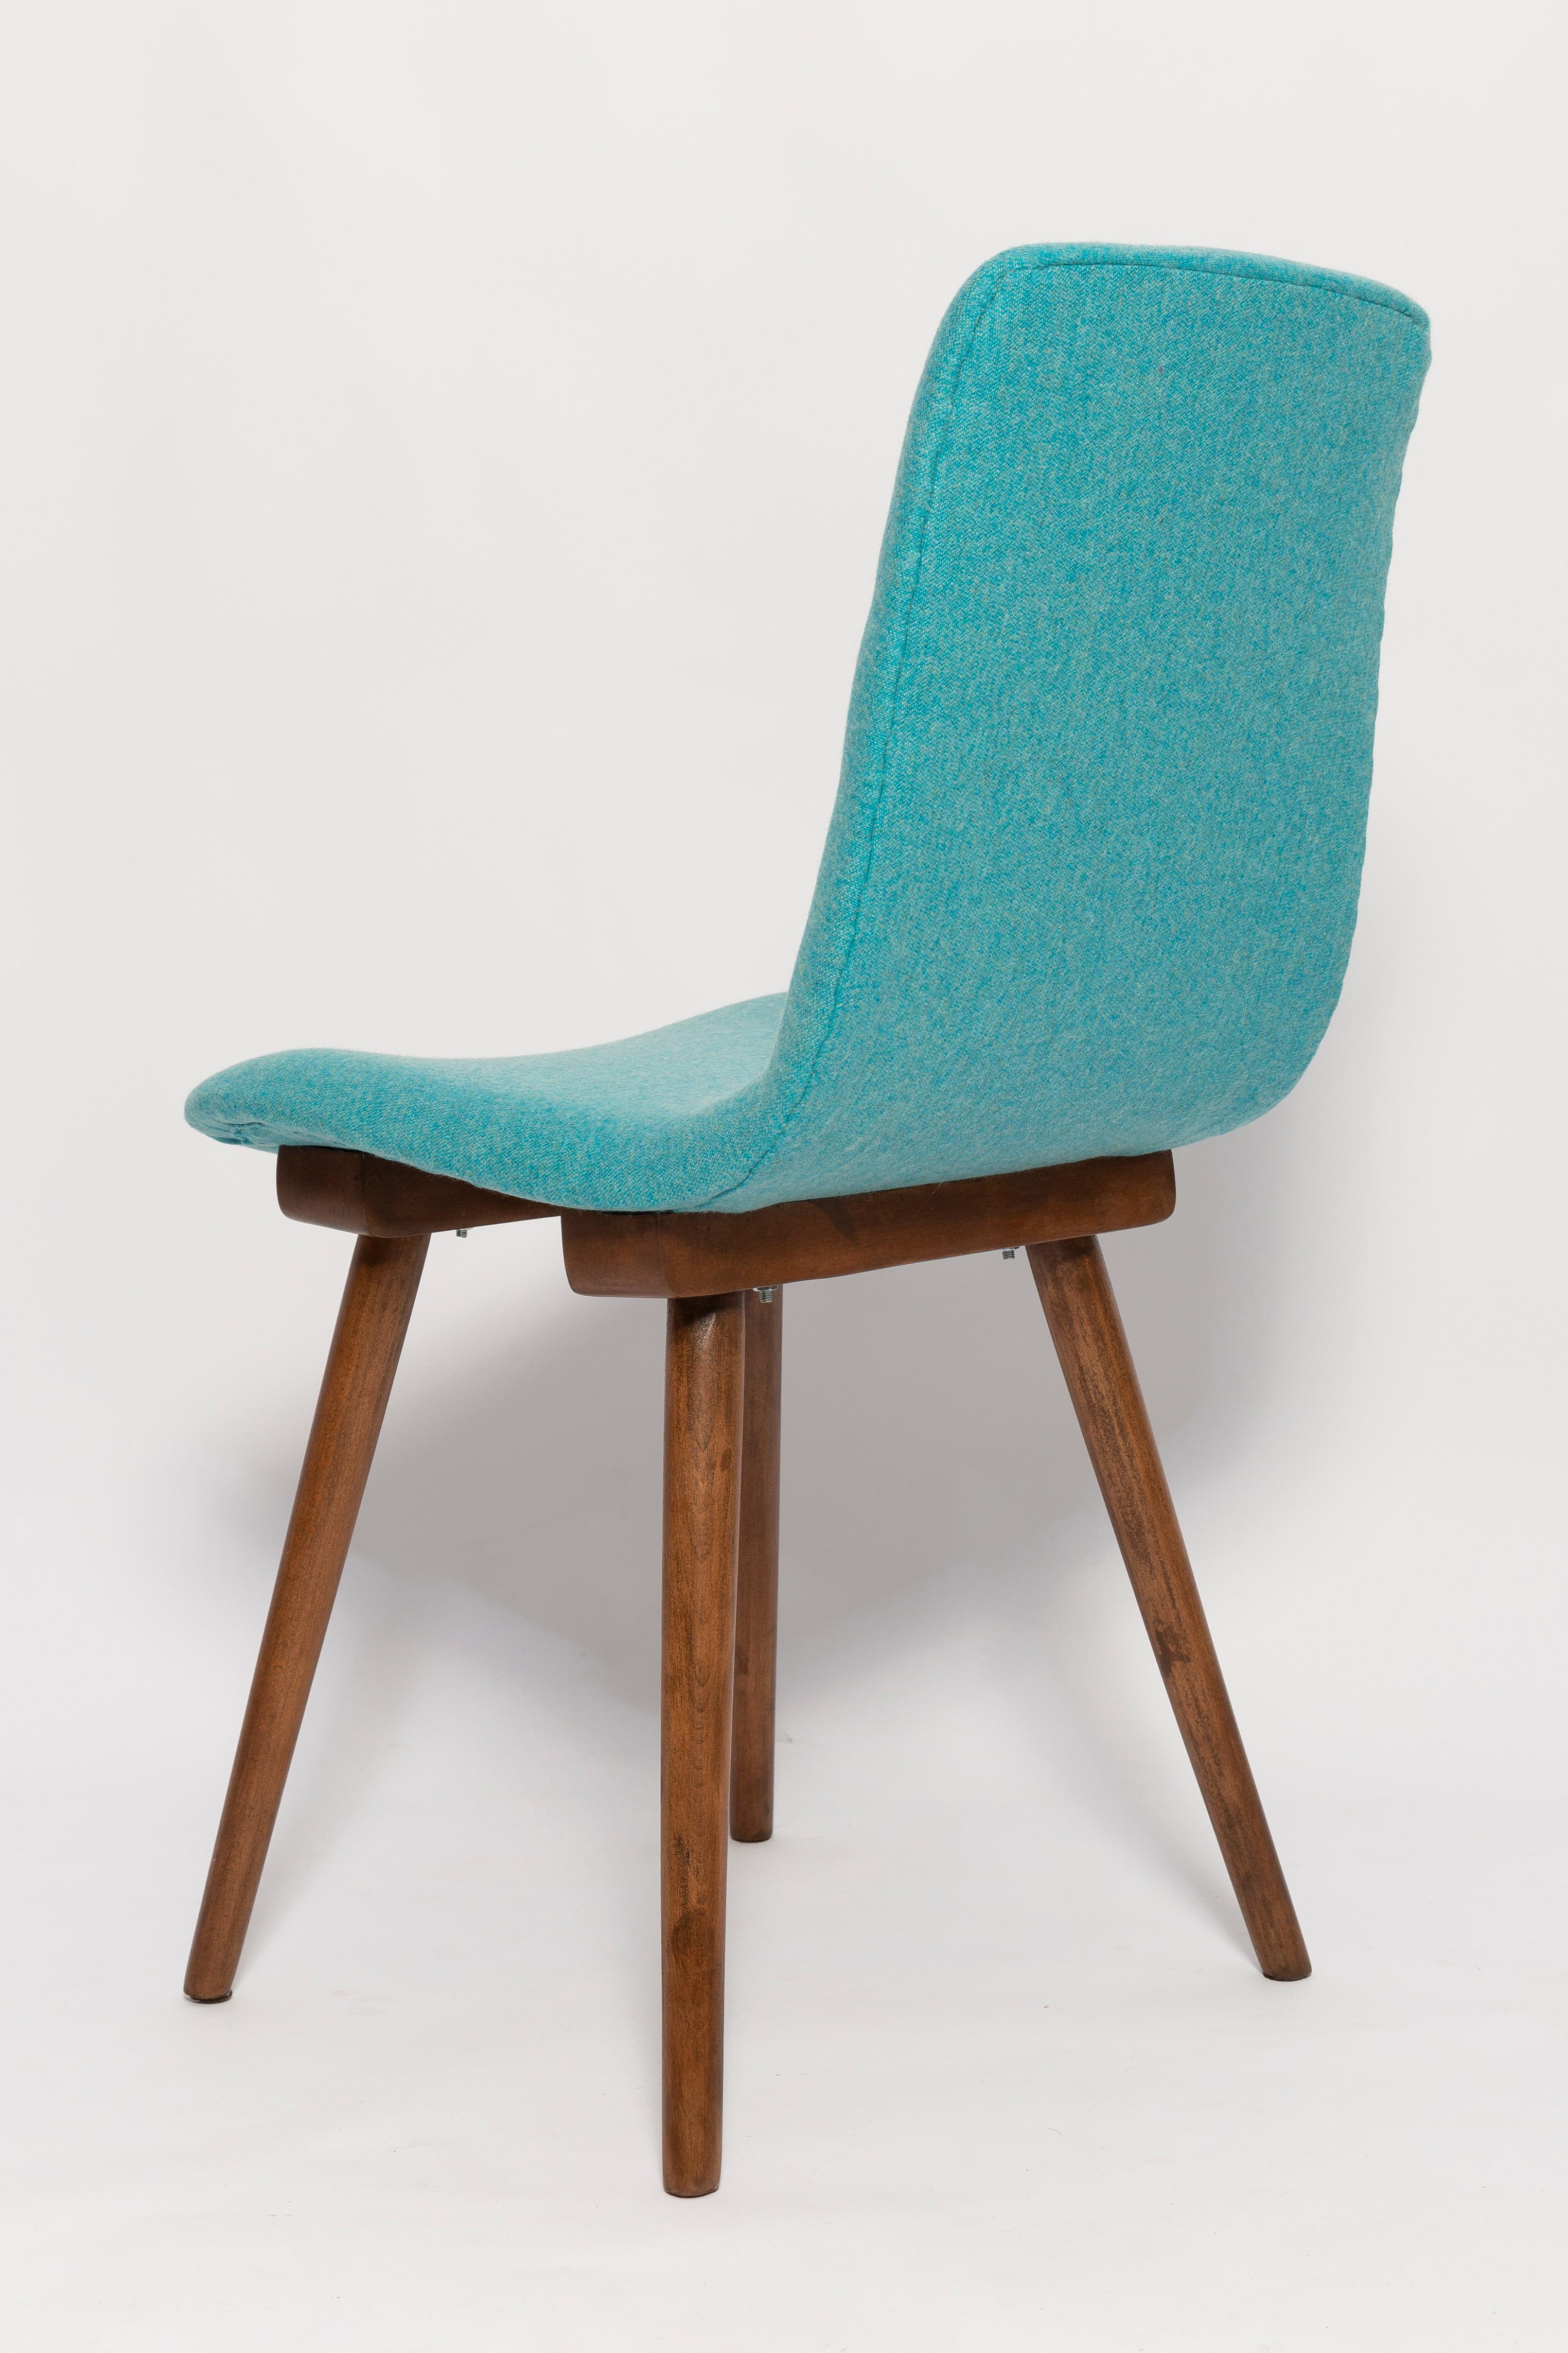 Set of Four Mid Century Acqua Wool Vintage Chairs, Fameg Factory, Europe, 1960s In Excellent Condition For Sale In 05-080 Hornowek, PL